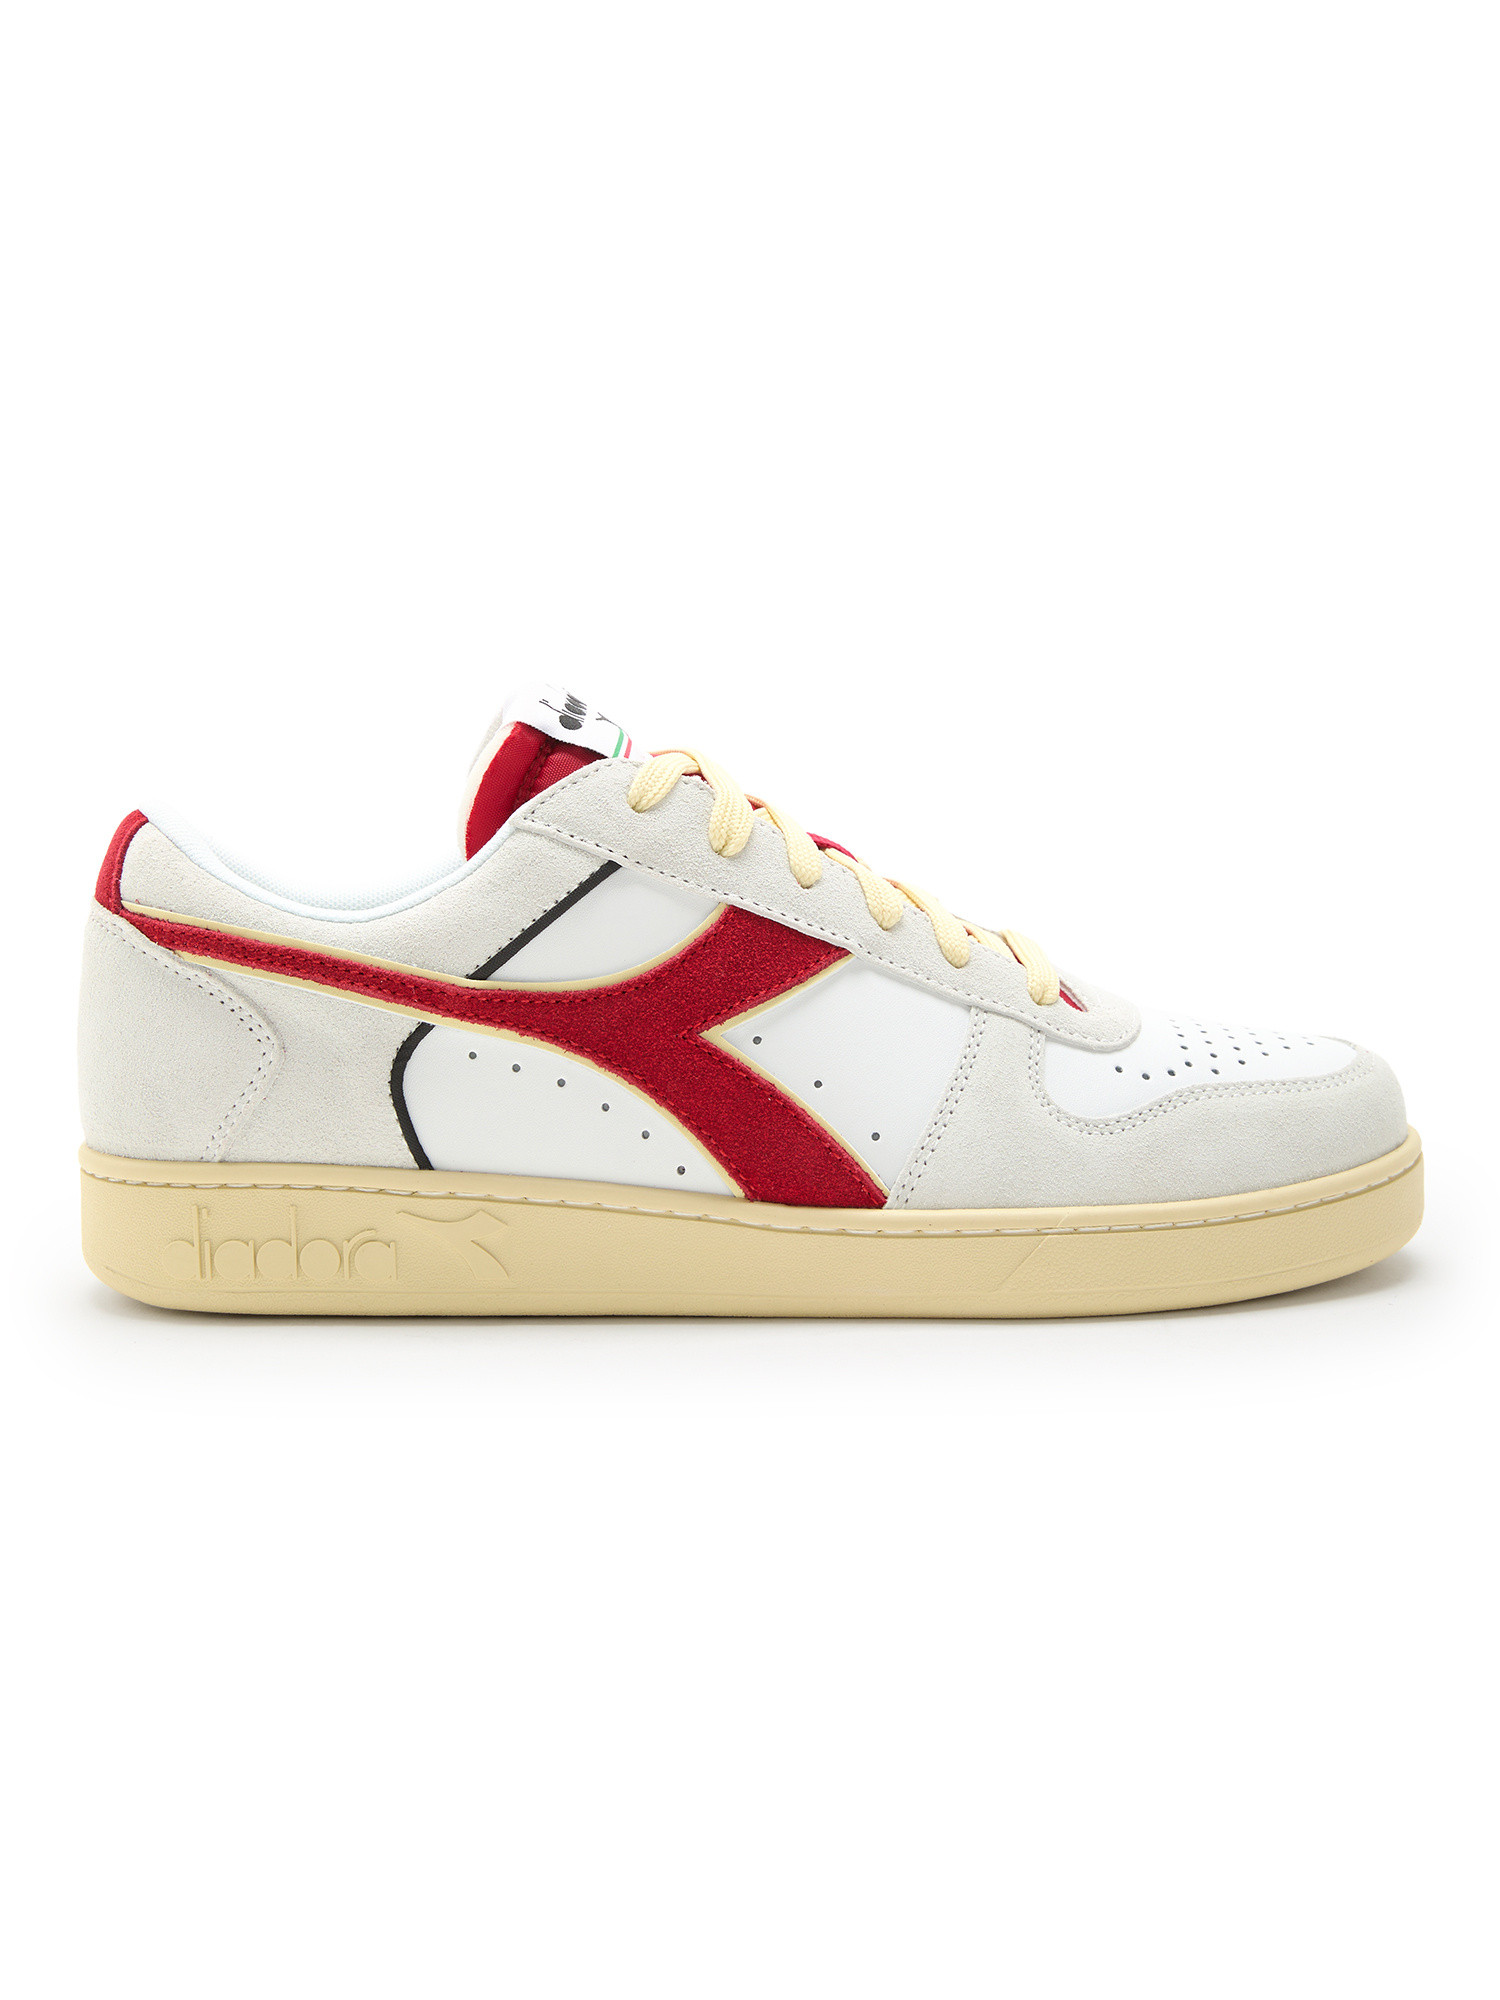 Diadora - Magic Basket Low Suede Leather Shoes, White, large image number 0